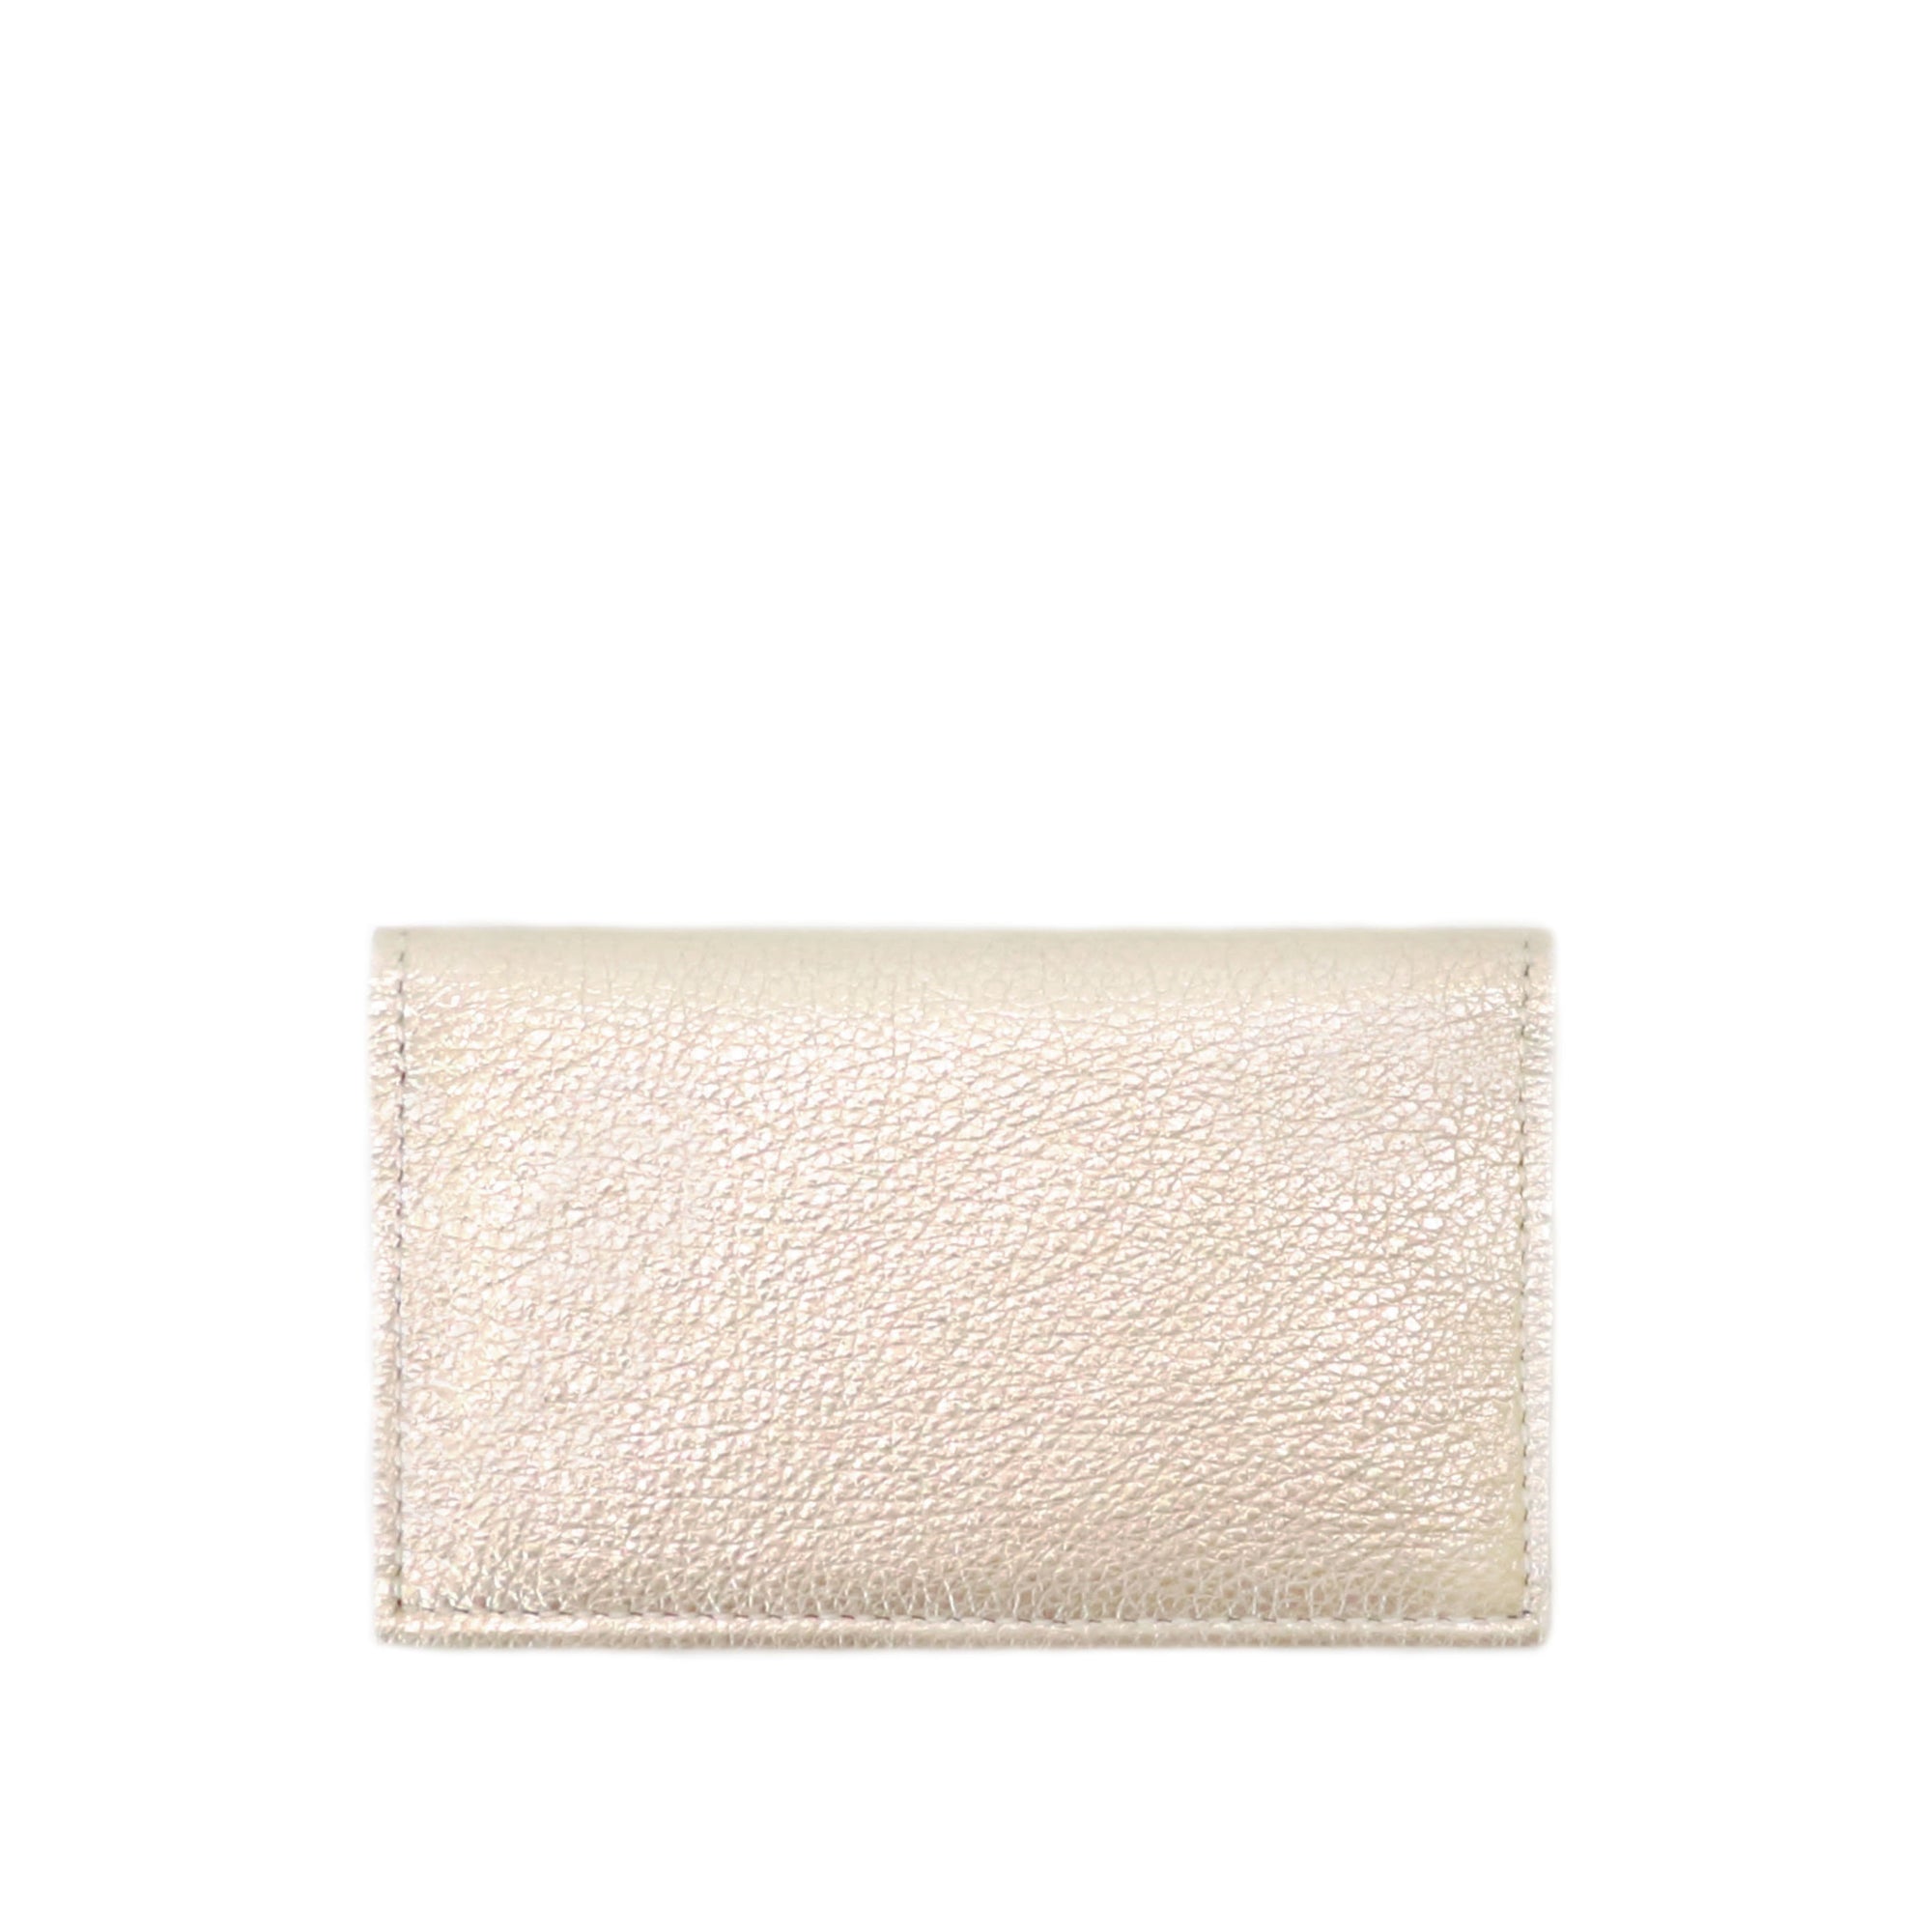 Cypress fold wallet in champagne metallic leather.  Made in USA by jana kay 